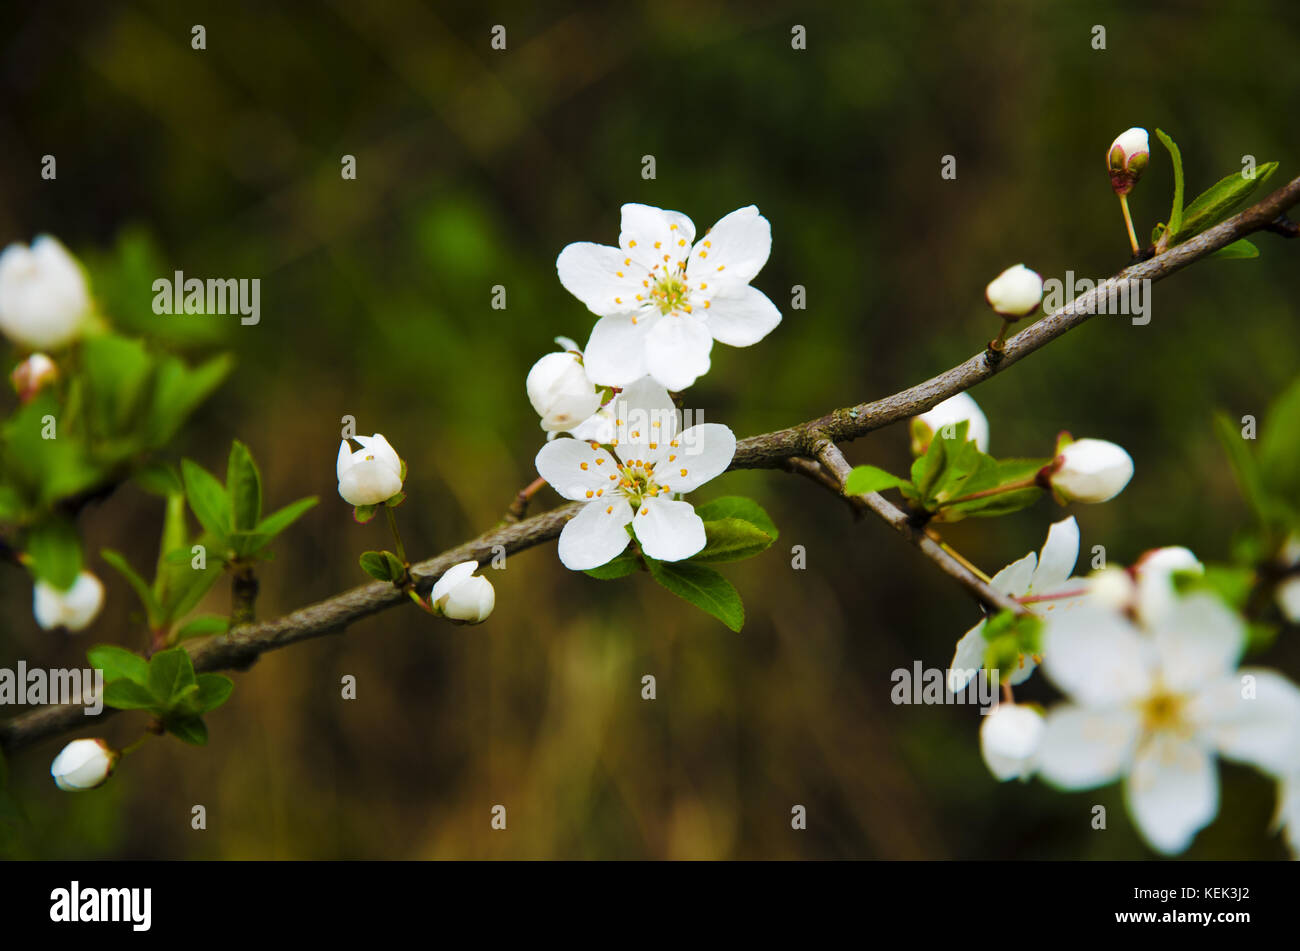 Close-up view on a twig with flowers and leaves of flowering tree in the garden on a spring sunny day Stock Photo